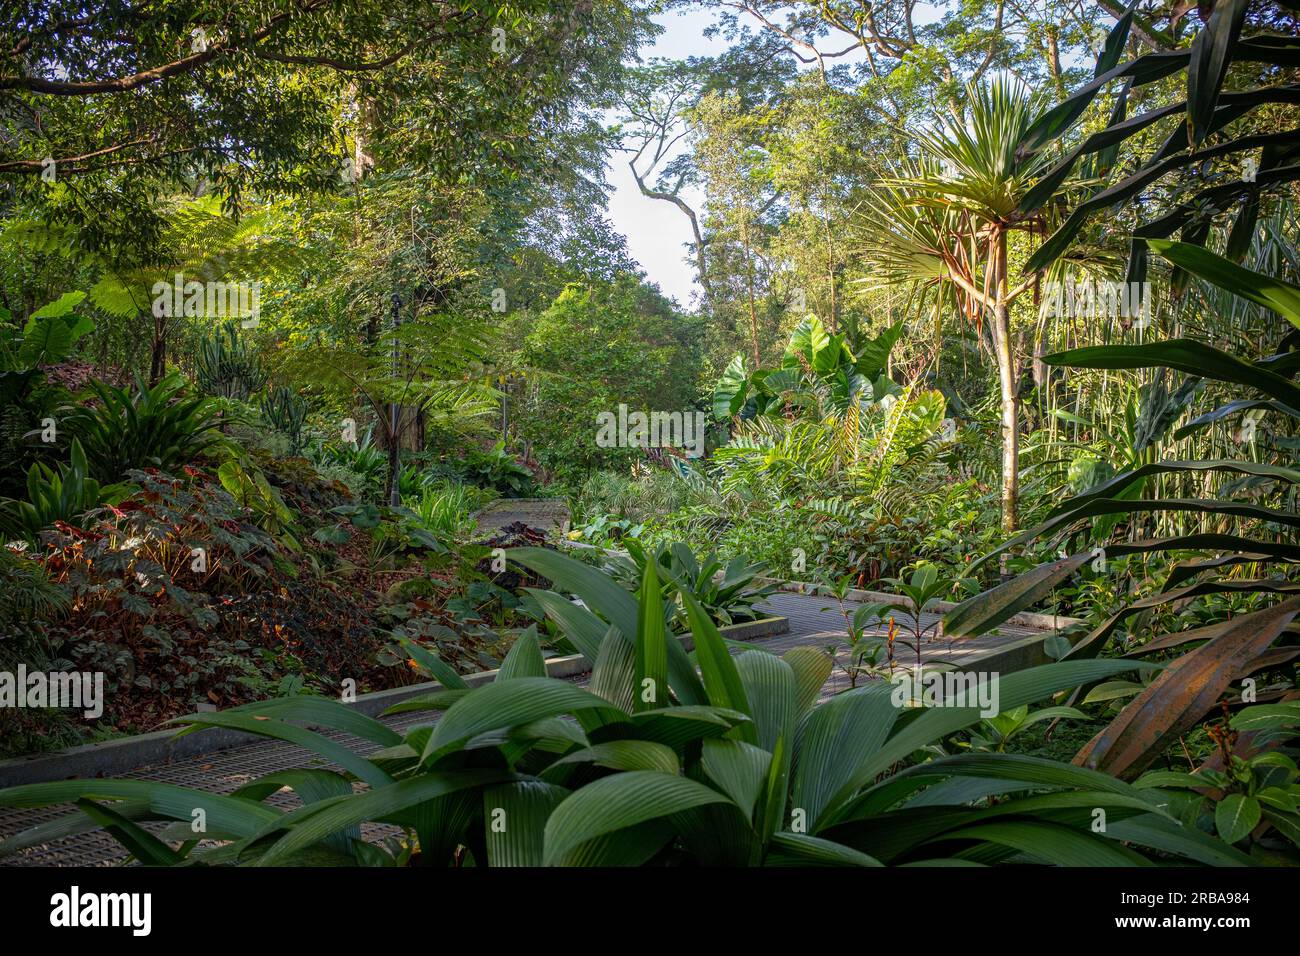 Morning view of a boardwalk trail going through lush vegetation in the Singapore botanical garden. Taken on a sunny morning with no people. Stock Photo